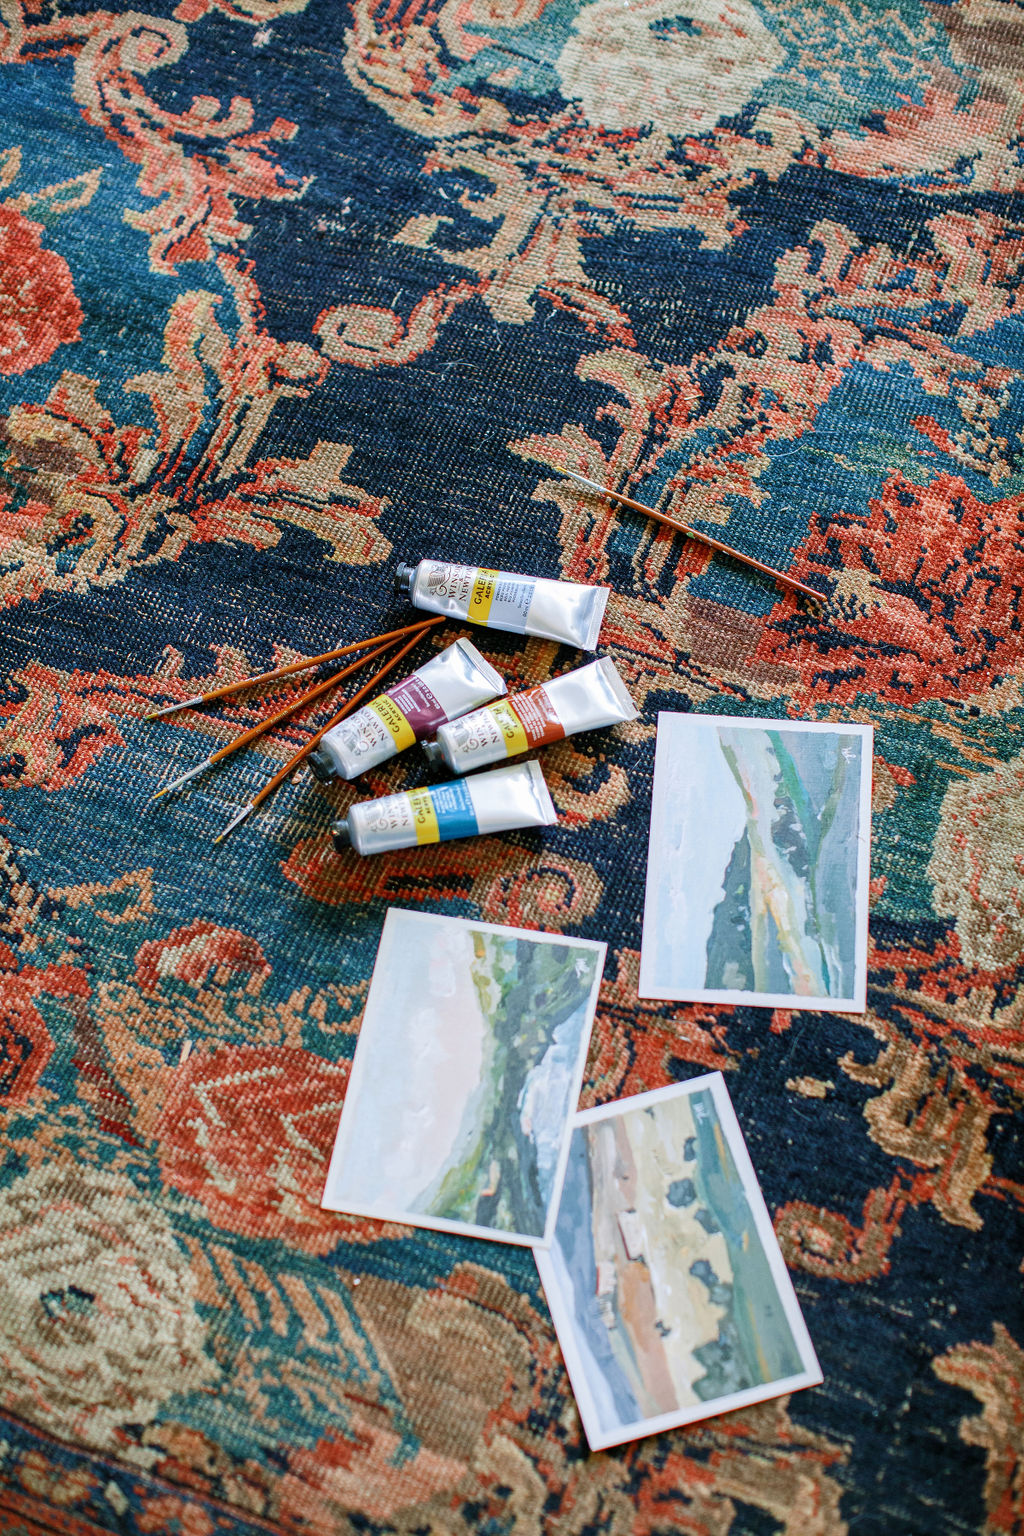 Artists paints and prints on a colorful Persian rug I Image by Josie Derrick